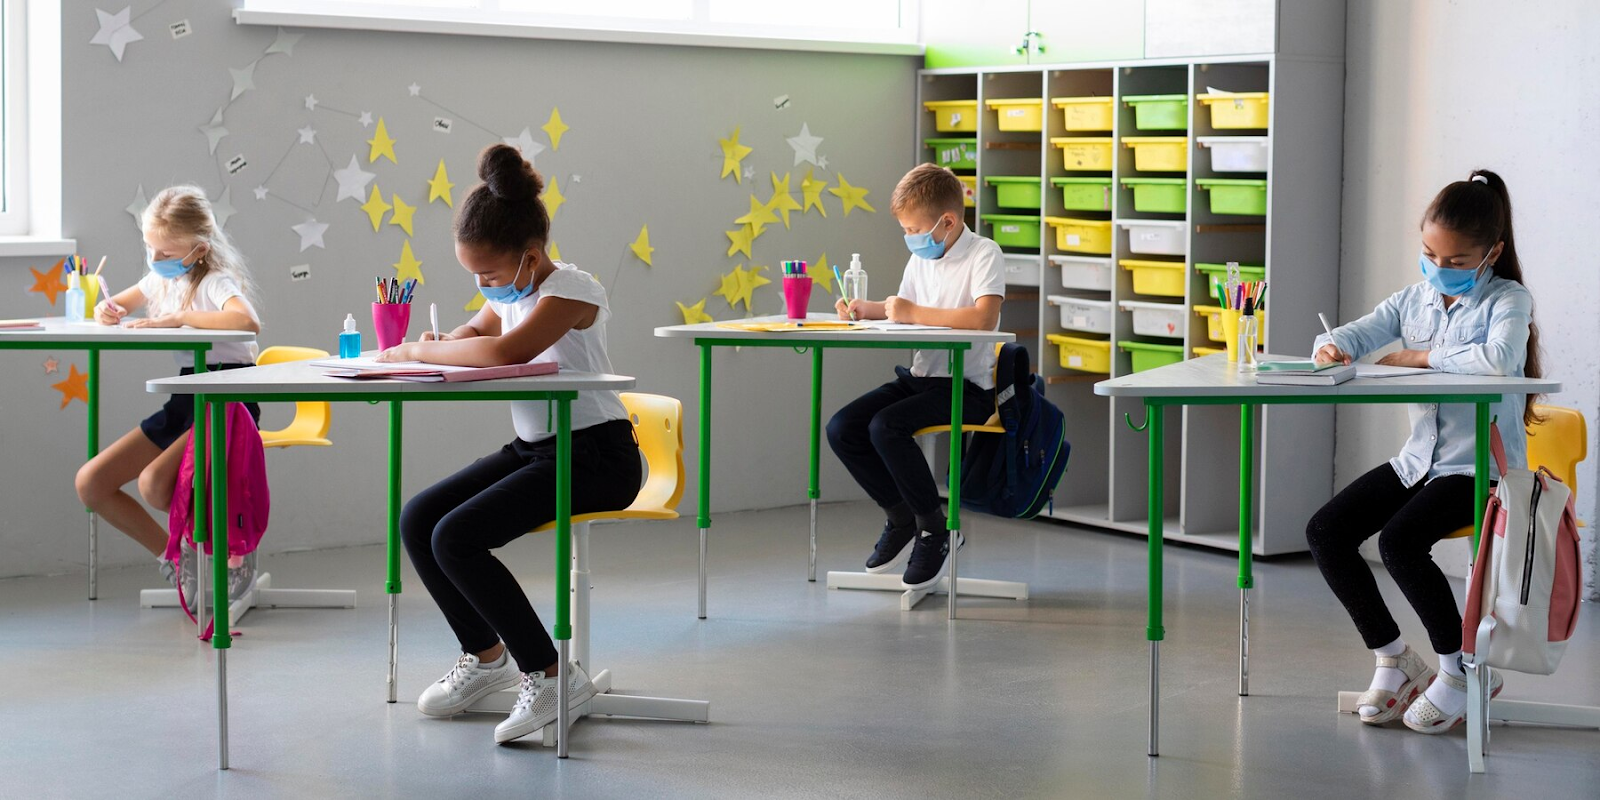 Utilizing Learning Spaces and Environments